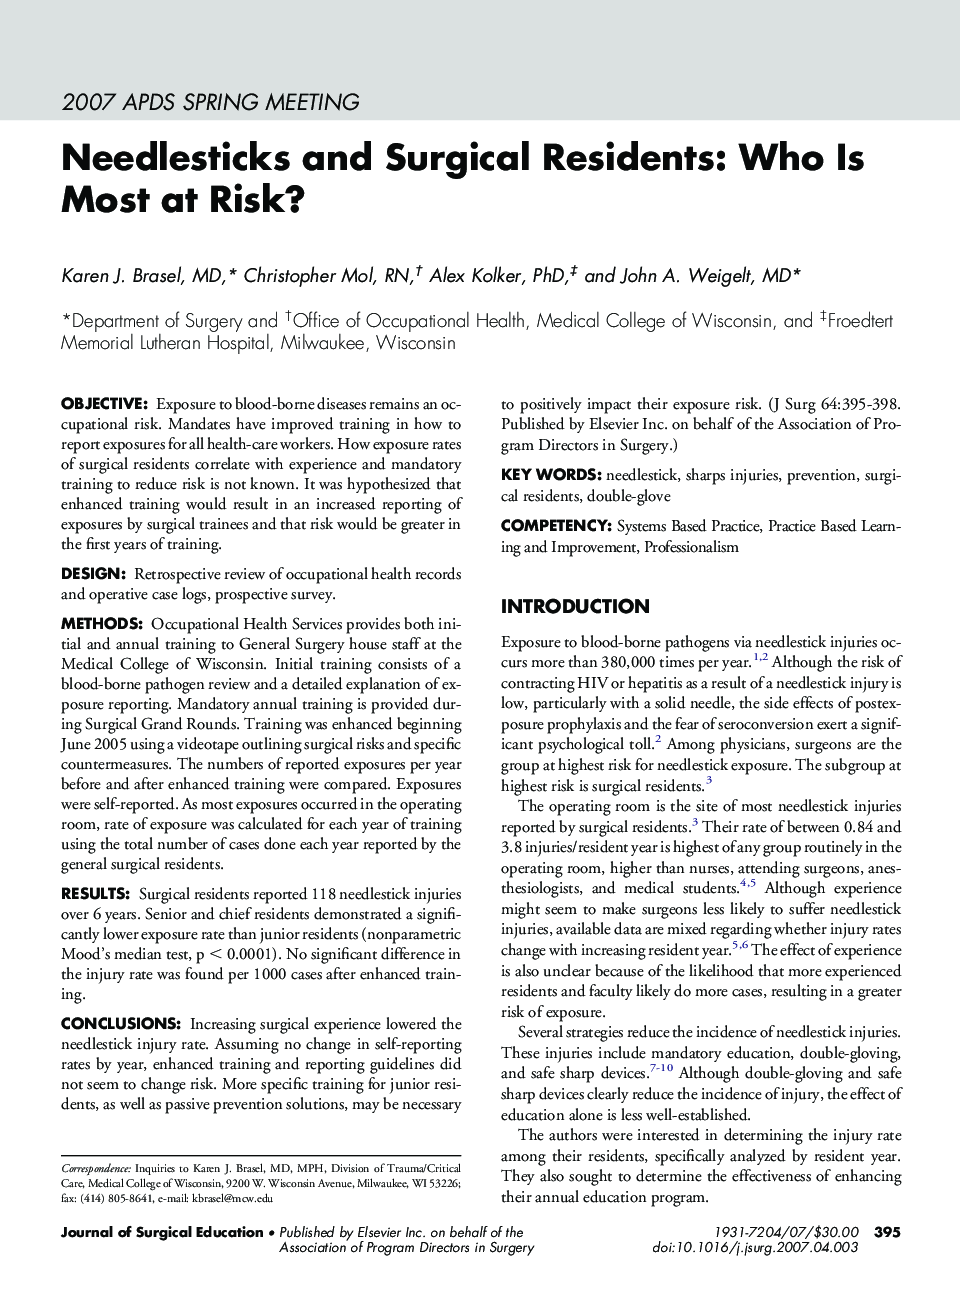 Needlesticks and Surgical Residents: Who Is Most at Risk?